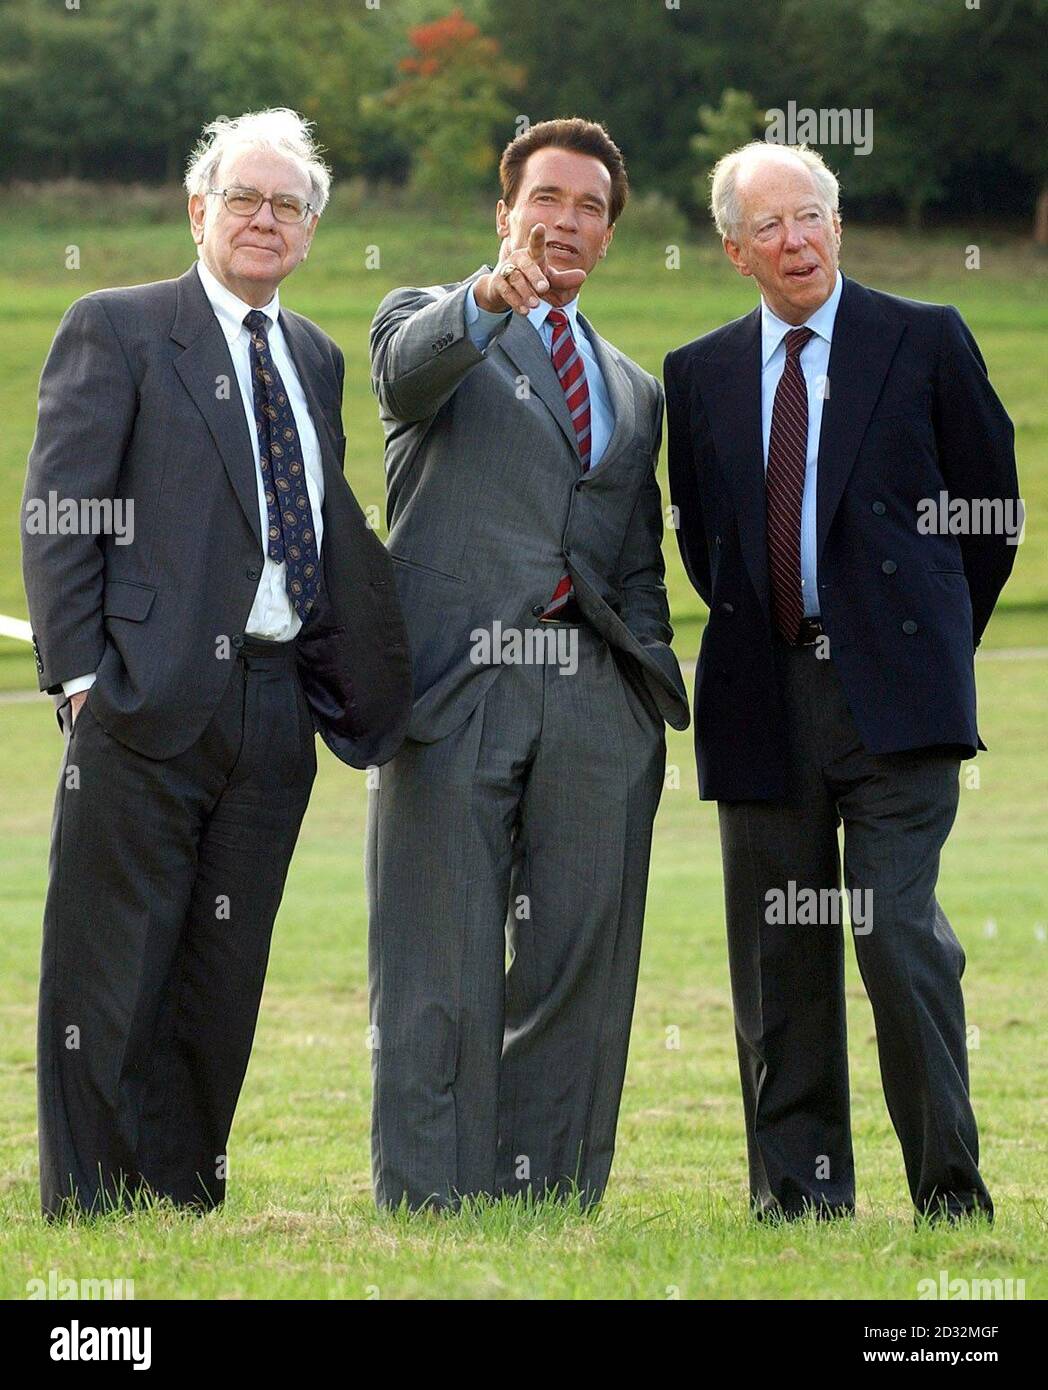 Warren Buffett (left) and Arnold Schwarzenegger are met by Lord Rothschild (right) as they arrive at the Waddesdon Manor near Aylesbury (35 miles NW of London), for a conference of European business leaders, organised by NetJets. * ... which sells fractional ownership of private business jets and is owned by Mr Buffett's Berkshire Hathaway Inc holdings company. Mr Buffett, the USA's second wealthiest businessmen, has been linked with potential investors looking to purchase troubled nuclear group British Energy. Berkshire Hathaway owns two British electricity distribution companies, Northern Stock Photo